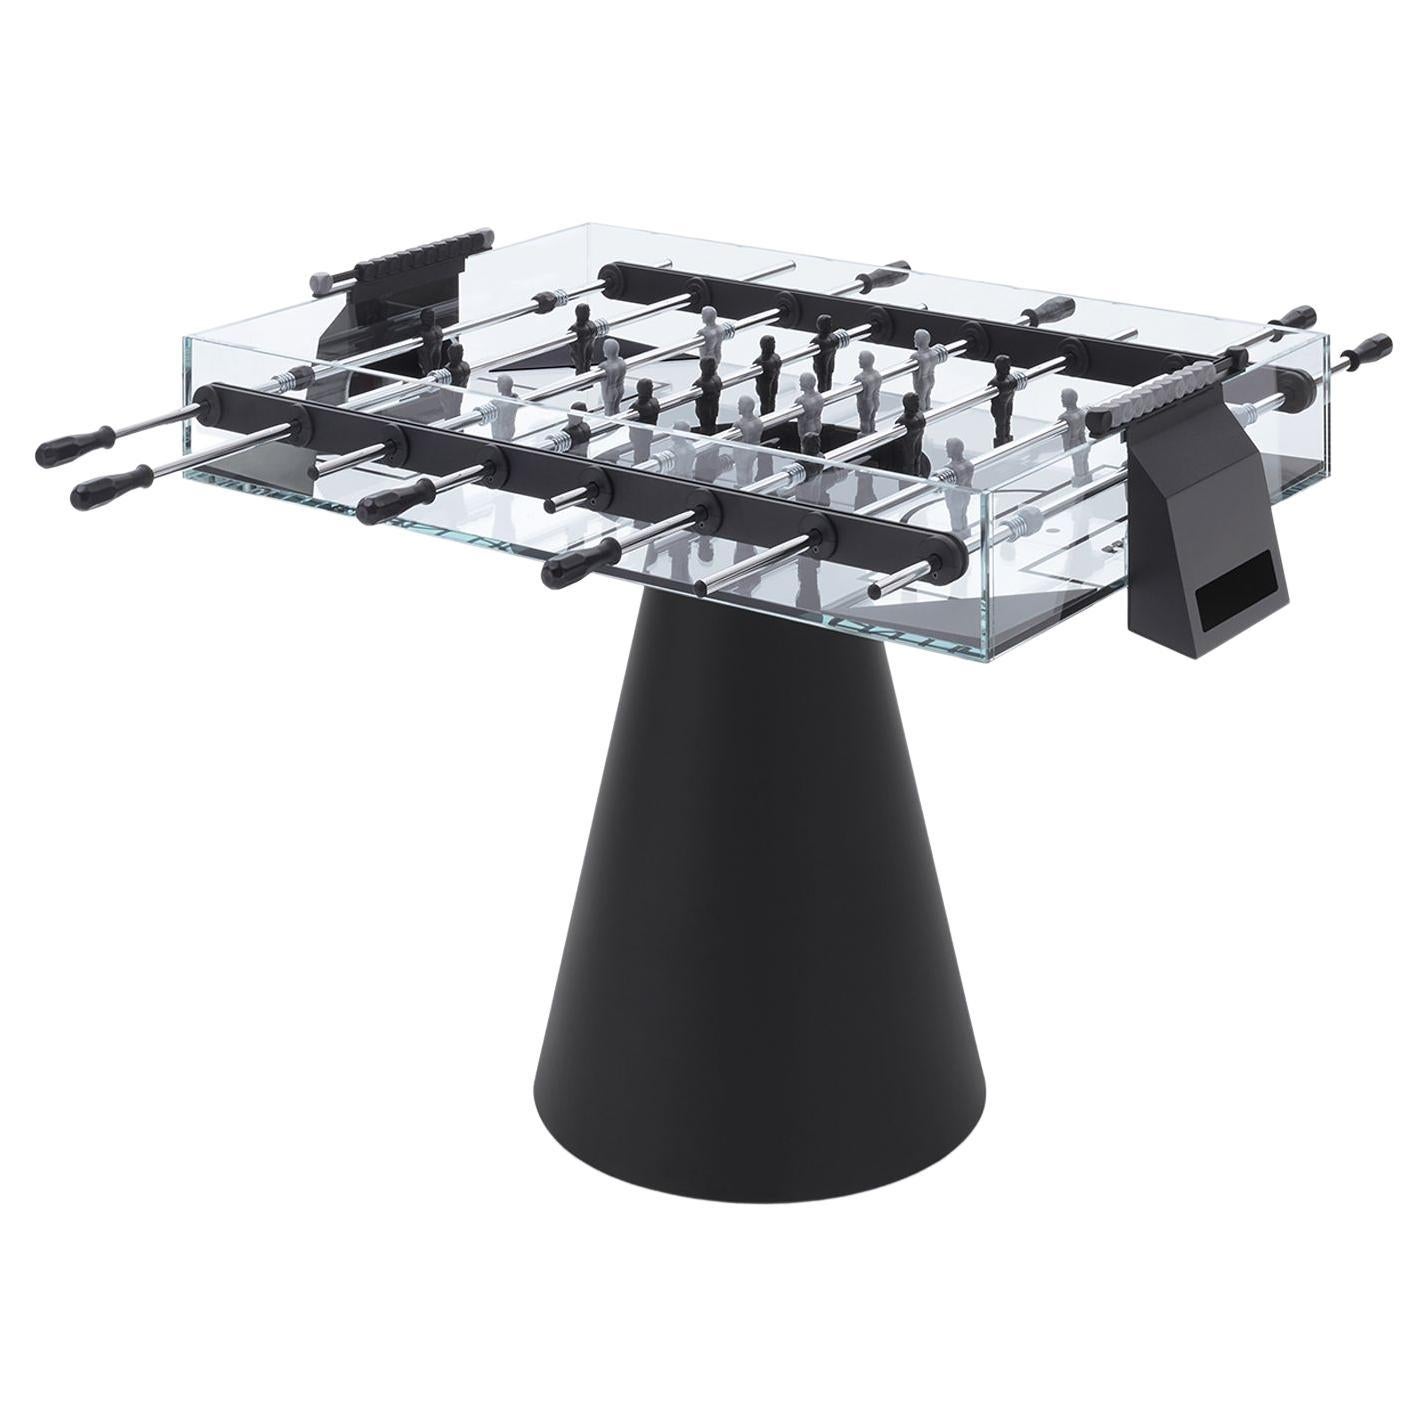 Table de football moderne Black White Ghost Metal and Crystal Indoor